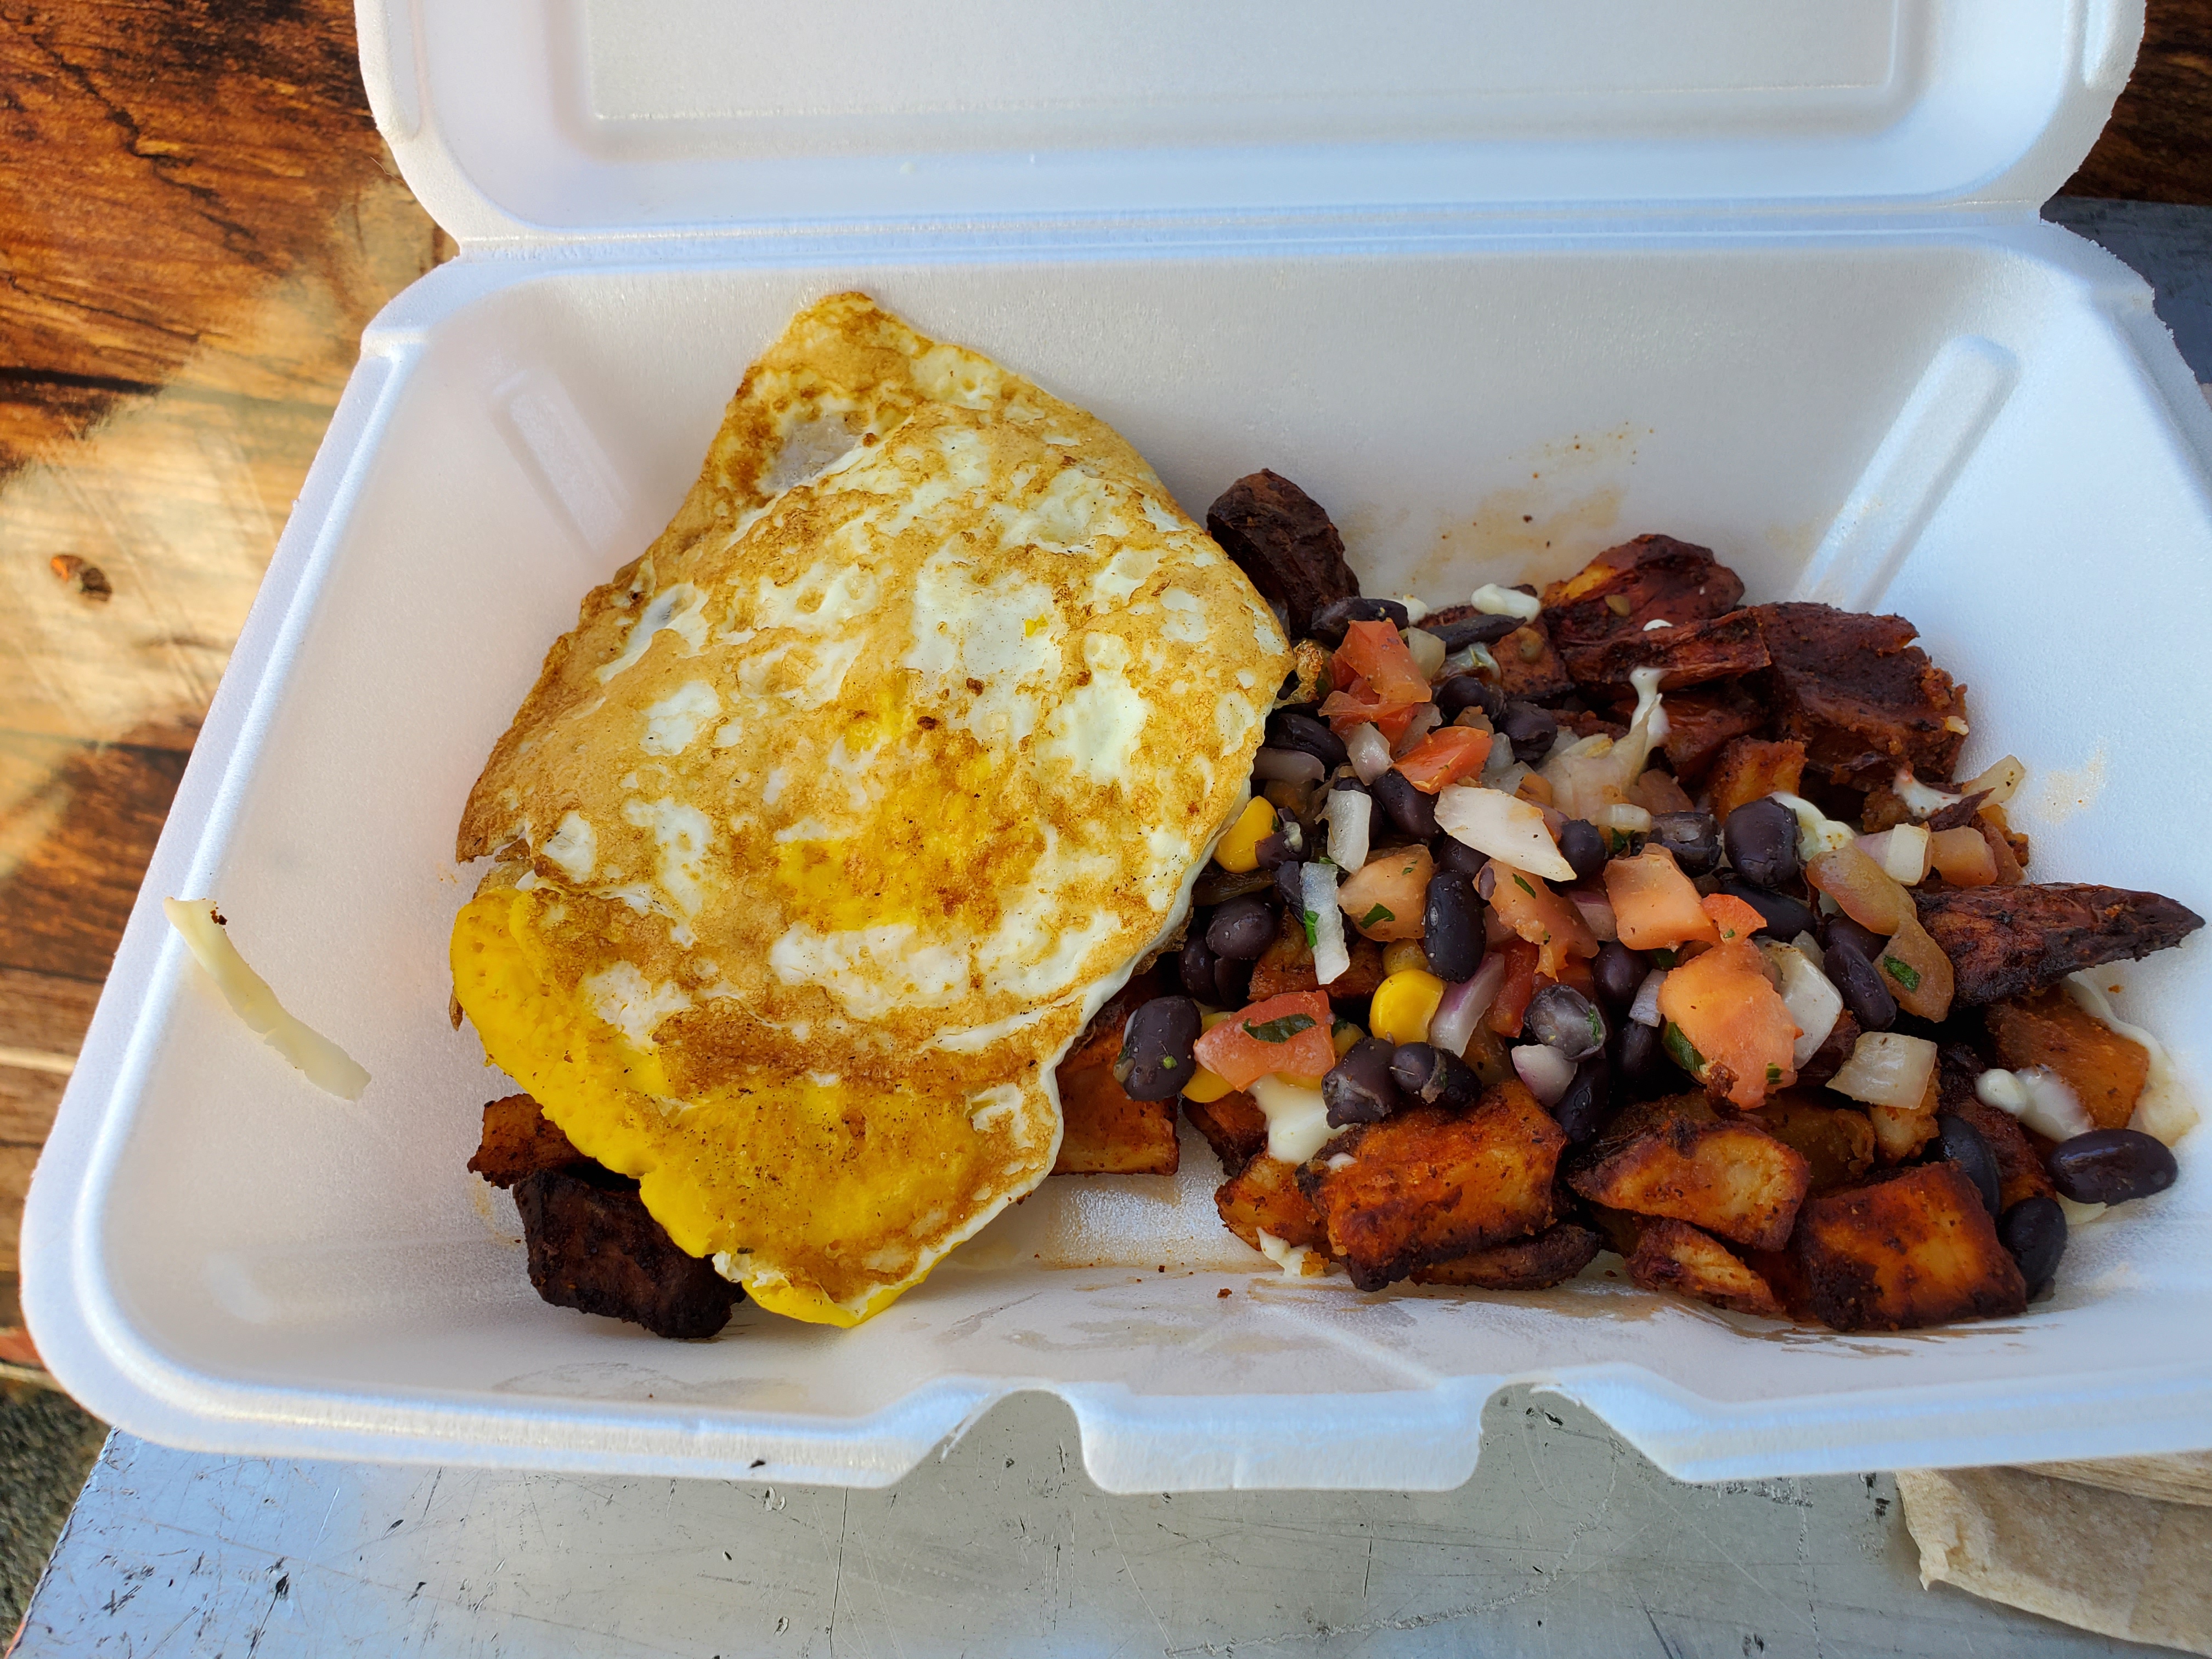 In a white styrofoam container, there is a fried egg on top of sweet potato hash. Top image by Carl Busch.